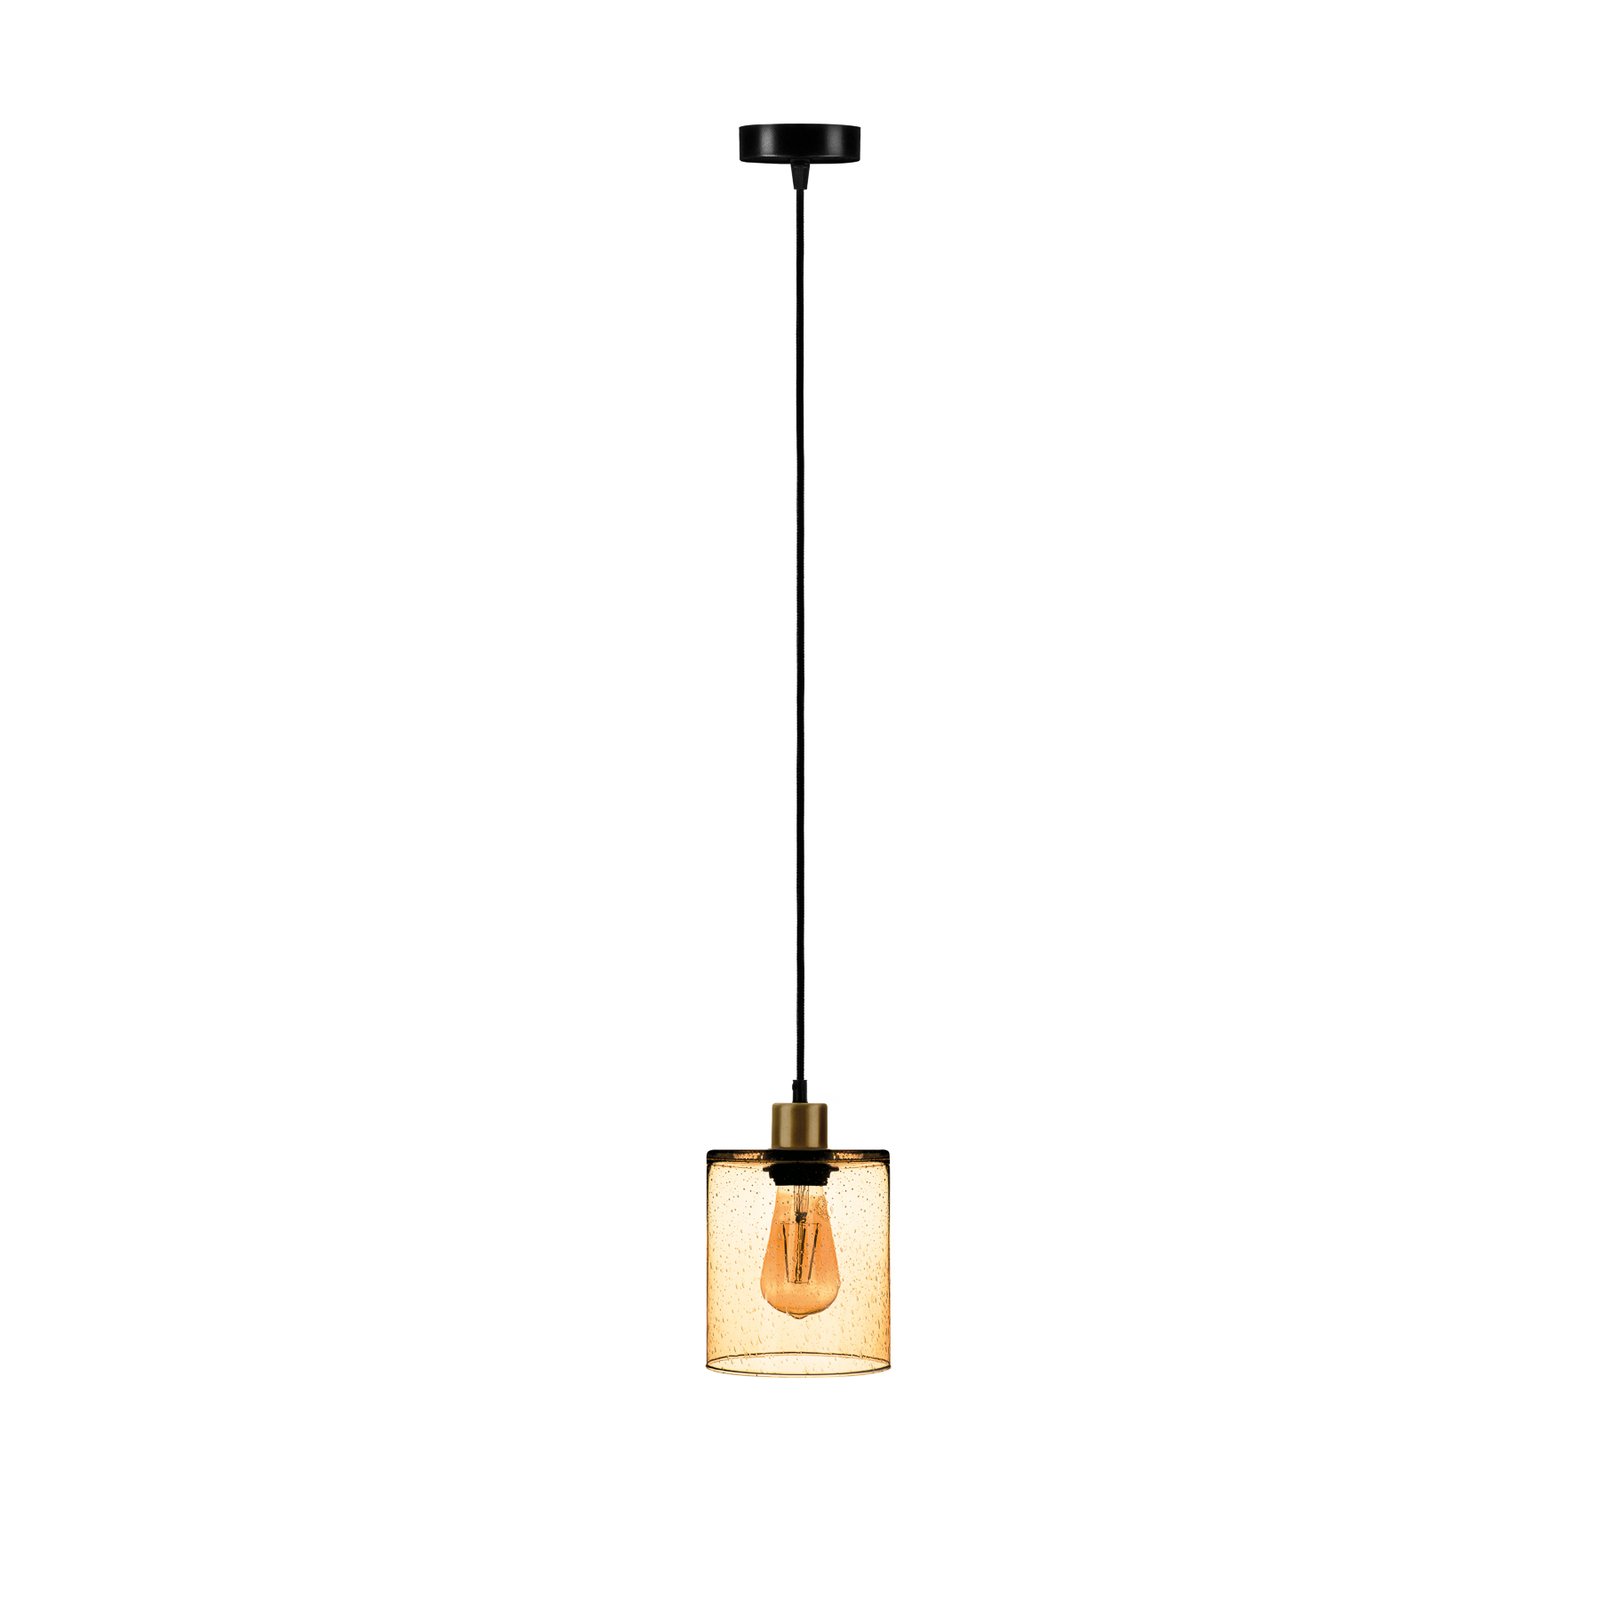 Soda hanging light with yellow glass shade Ø 15cm